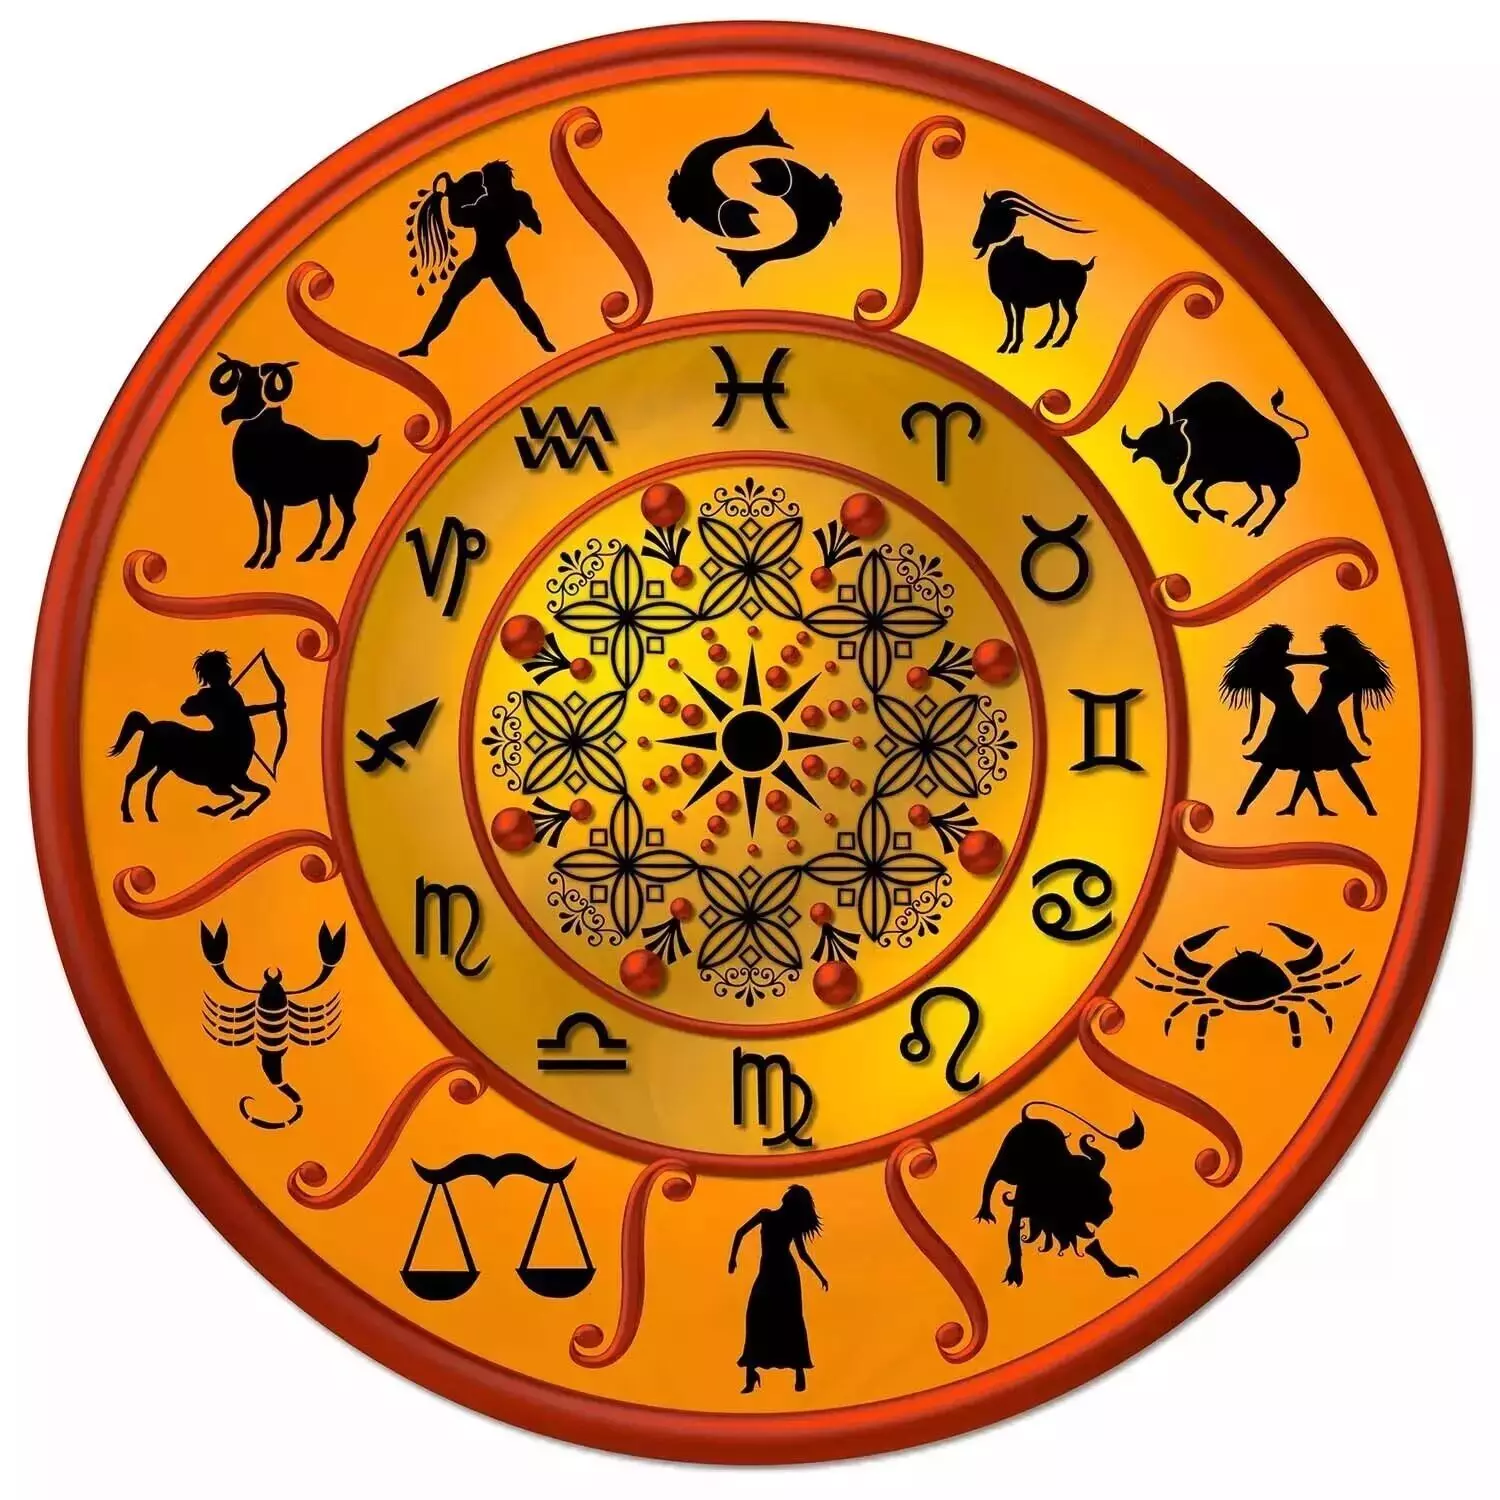 24 January – Know your todays horoscope